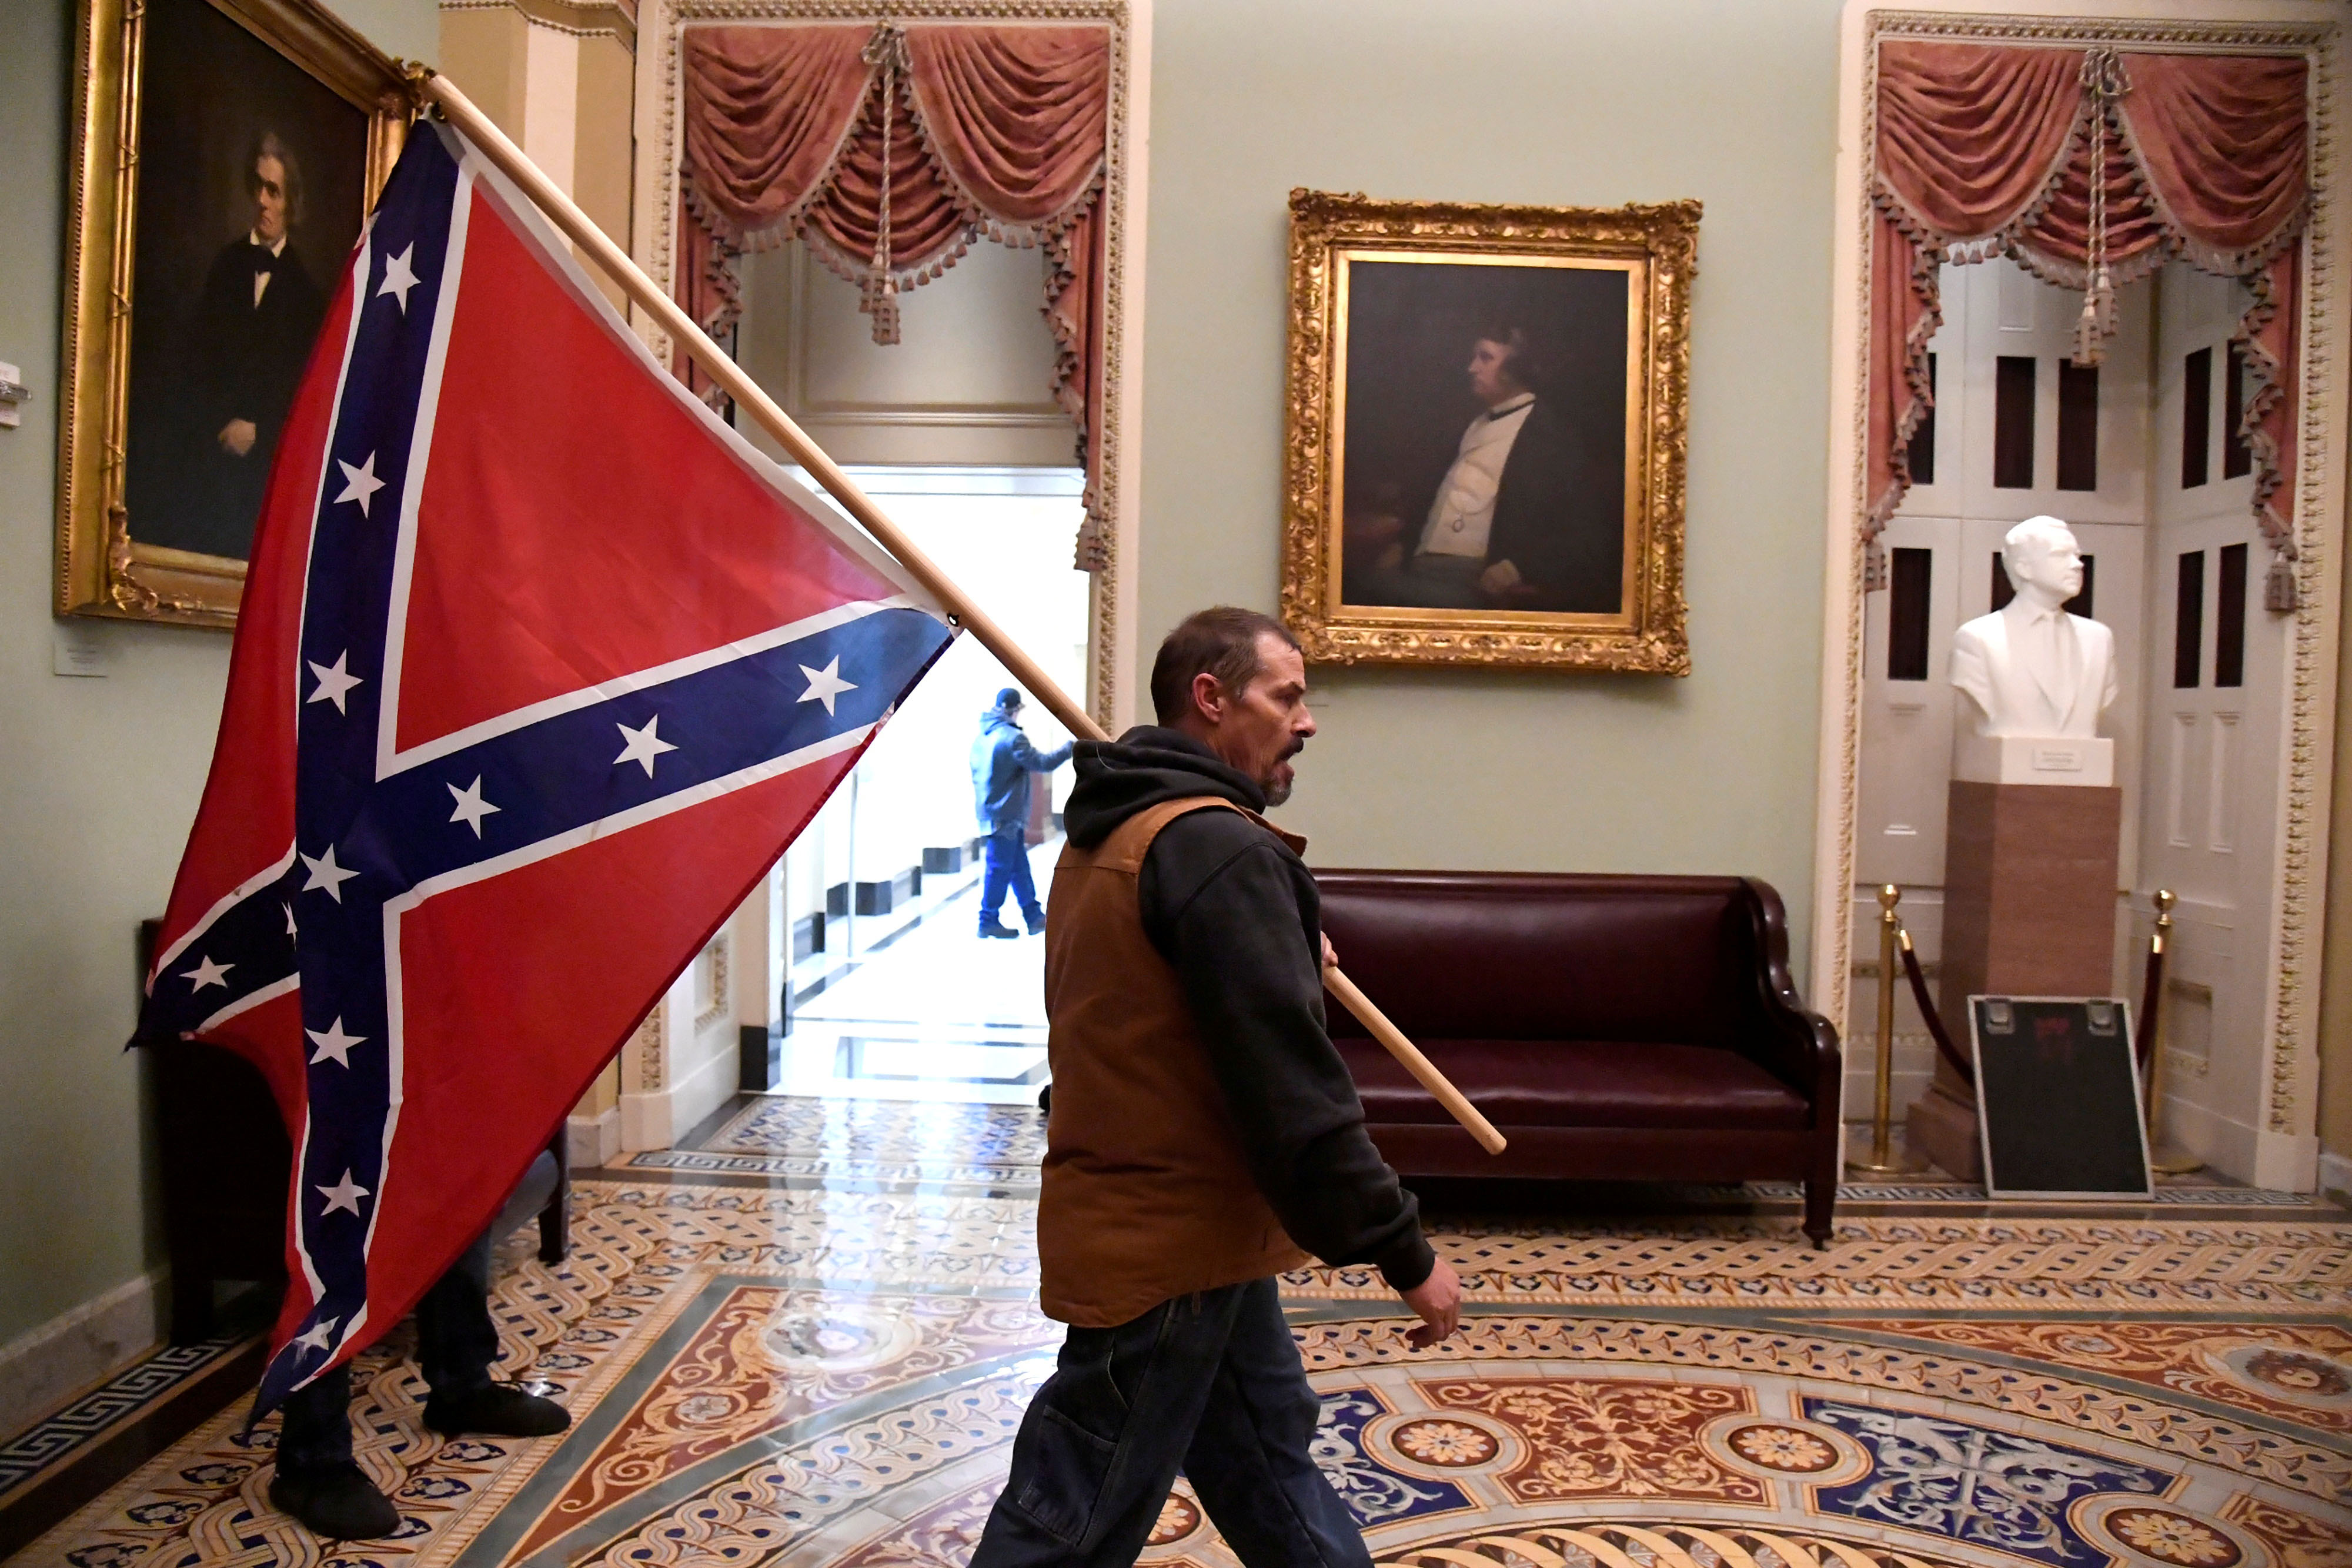 A member of the mob that stormed the US Capitol on January 6 holds a Confederate flag aloft in front of a portrait of John C. Calhoun (left).